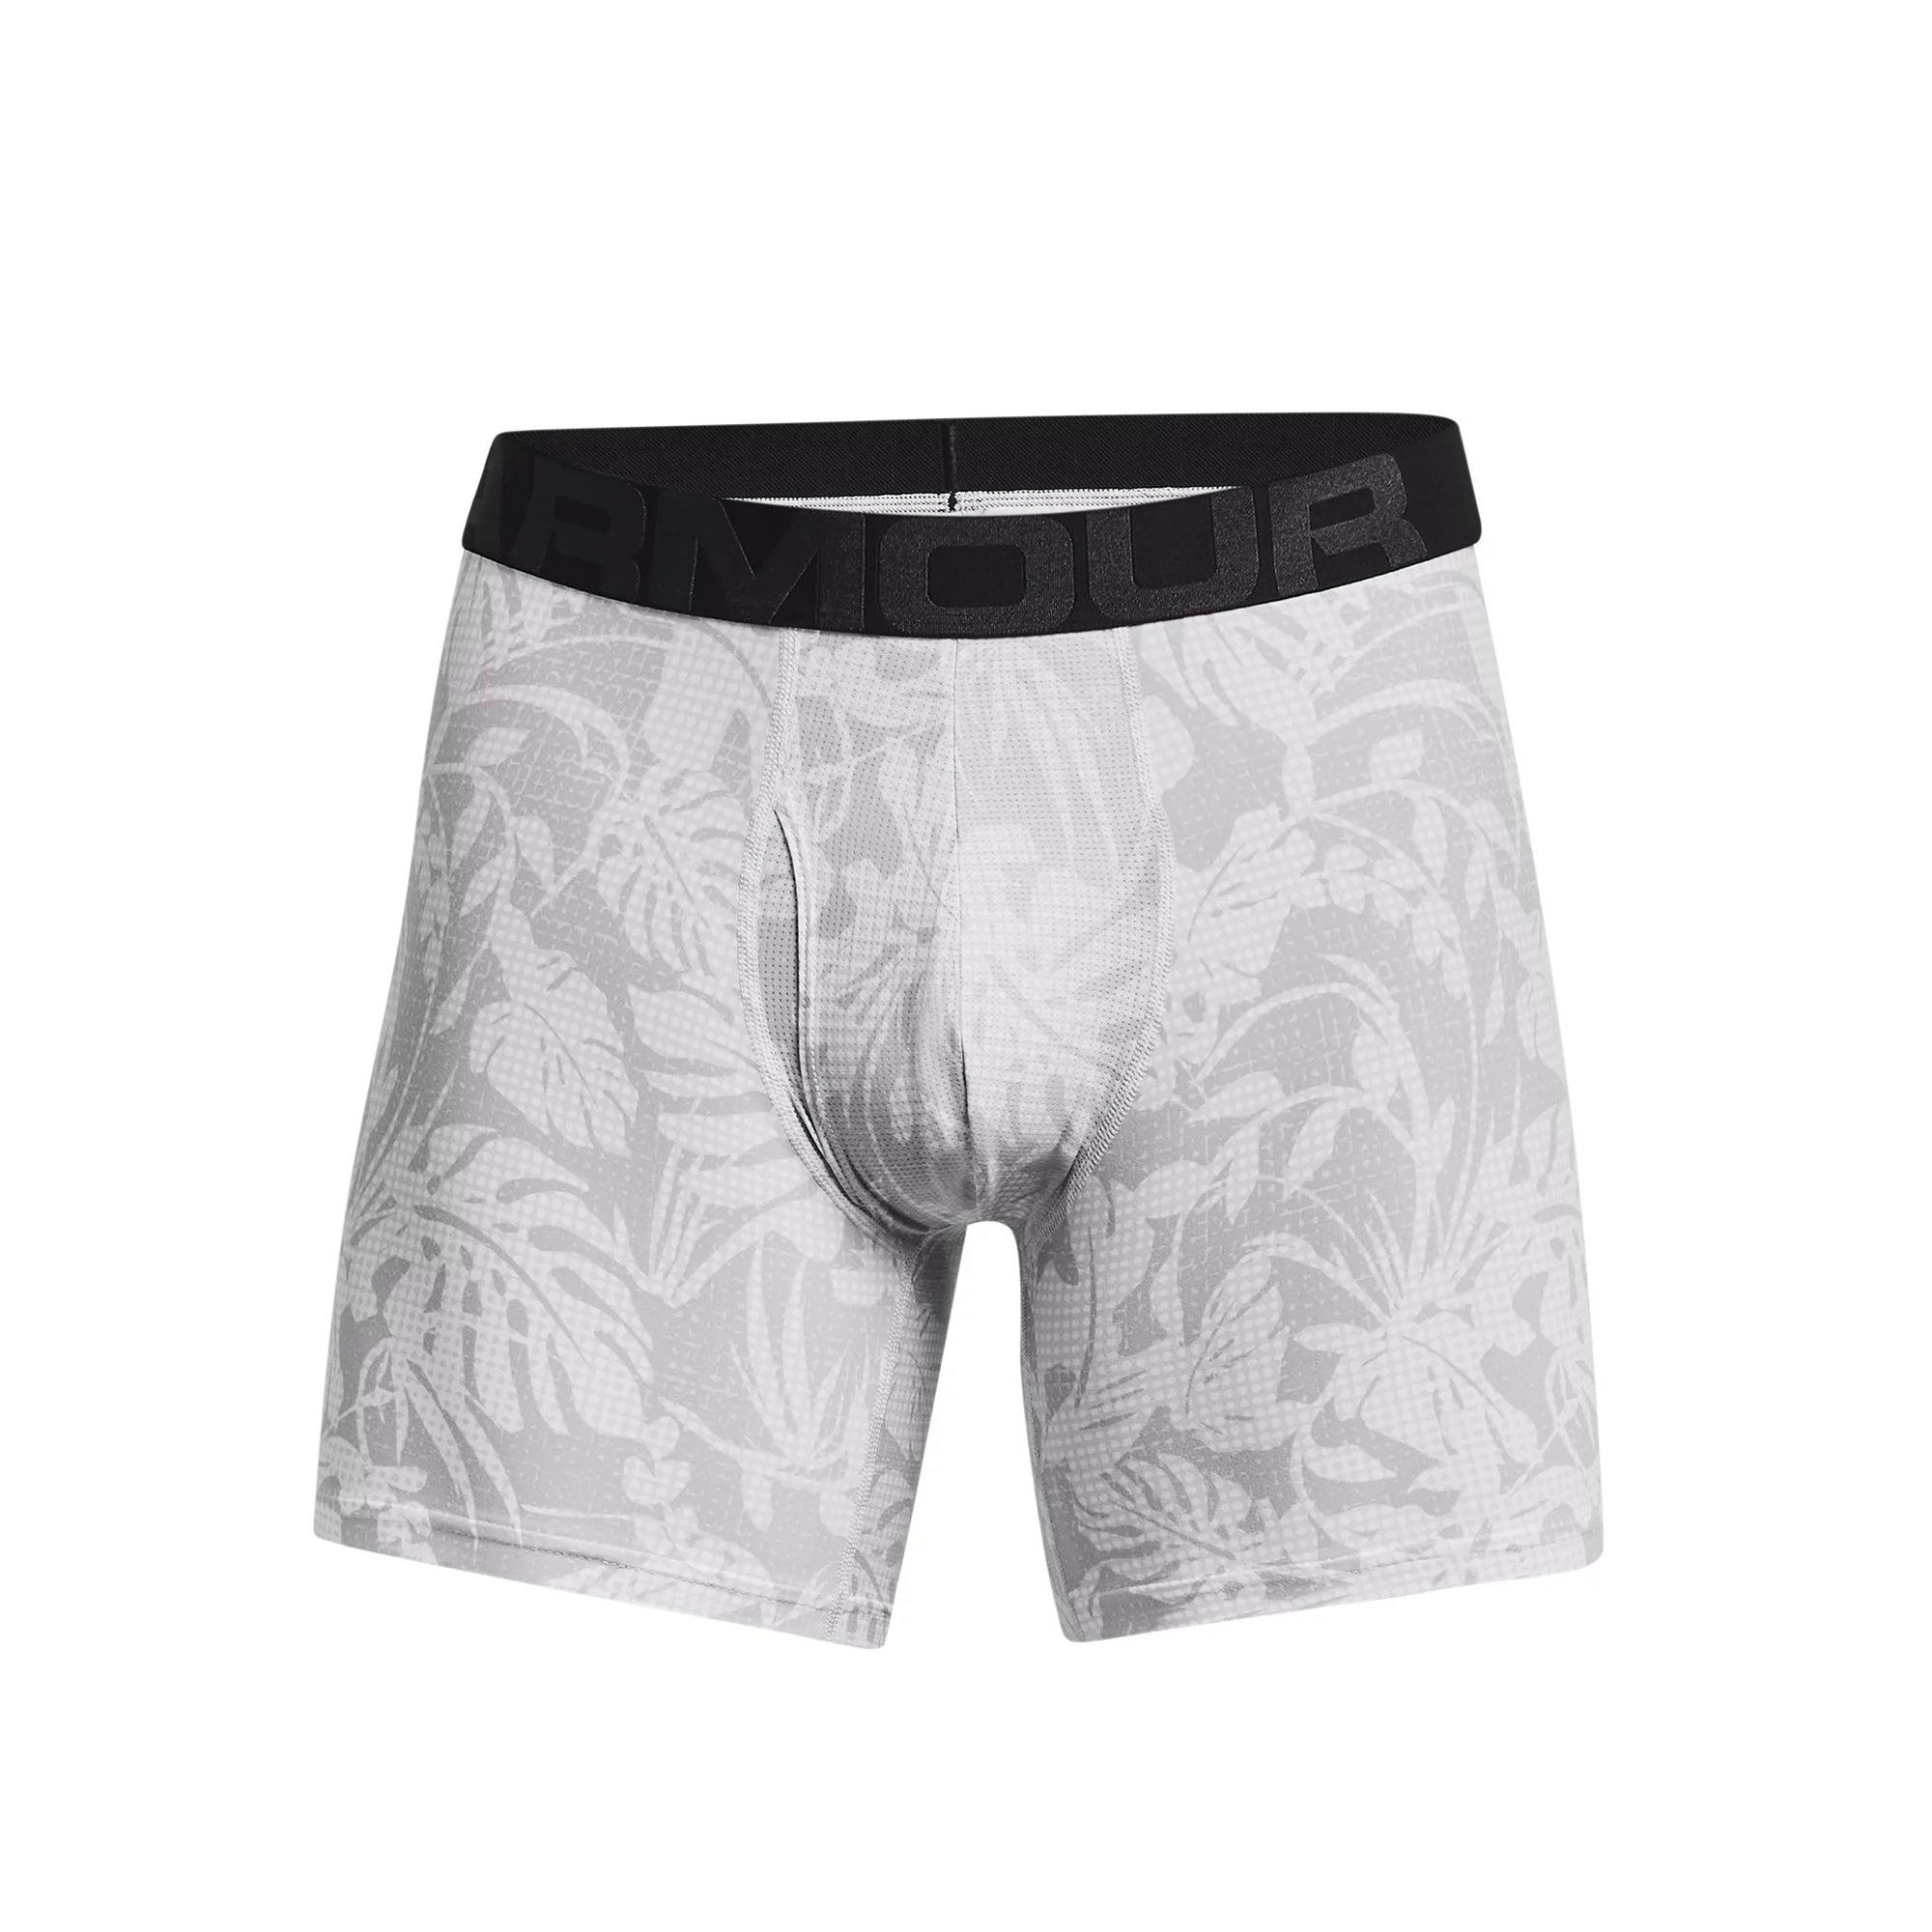 Đồ lót thể thao nam Under Armour Tech 6In Novelty 2 Pack - 1363621-014